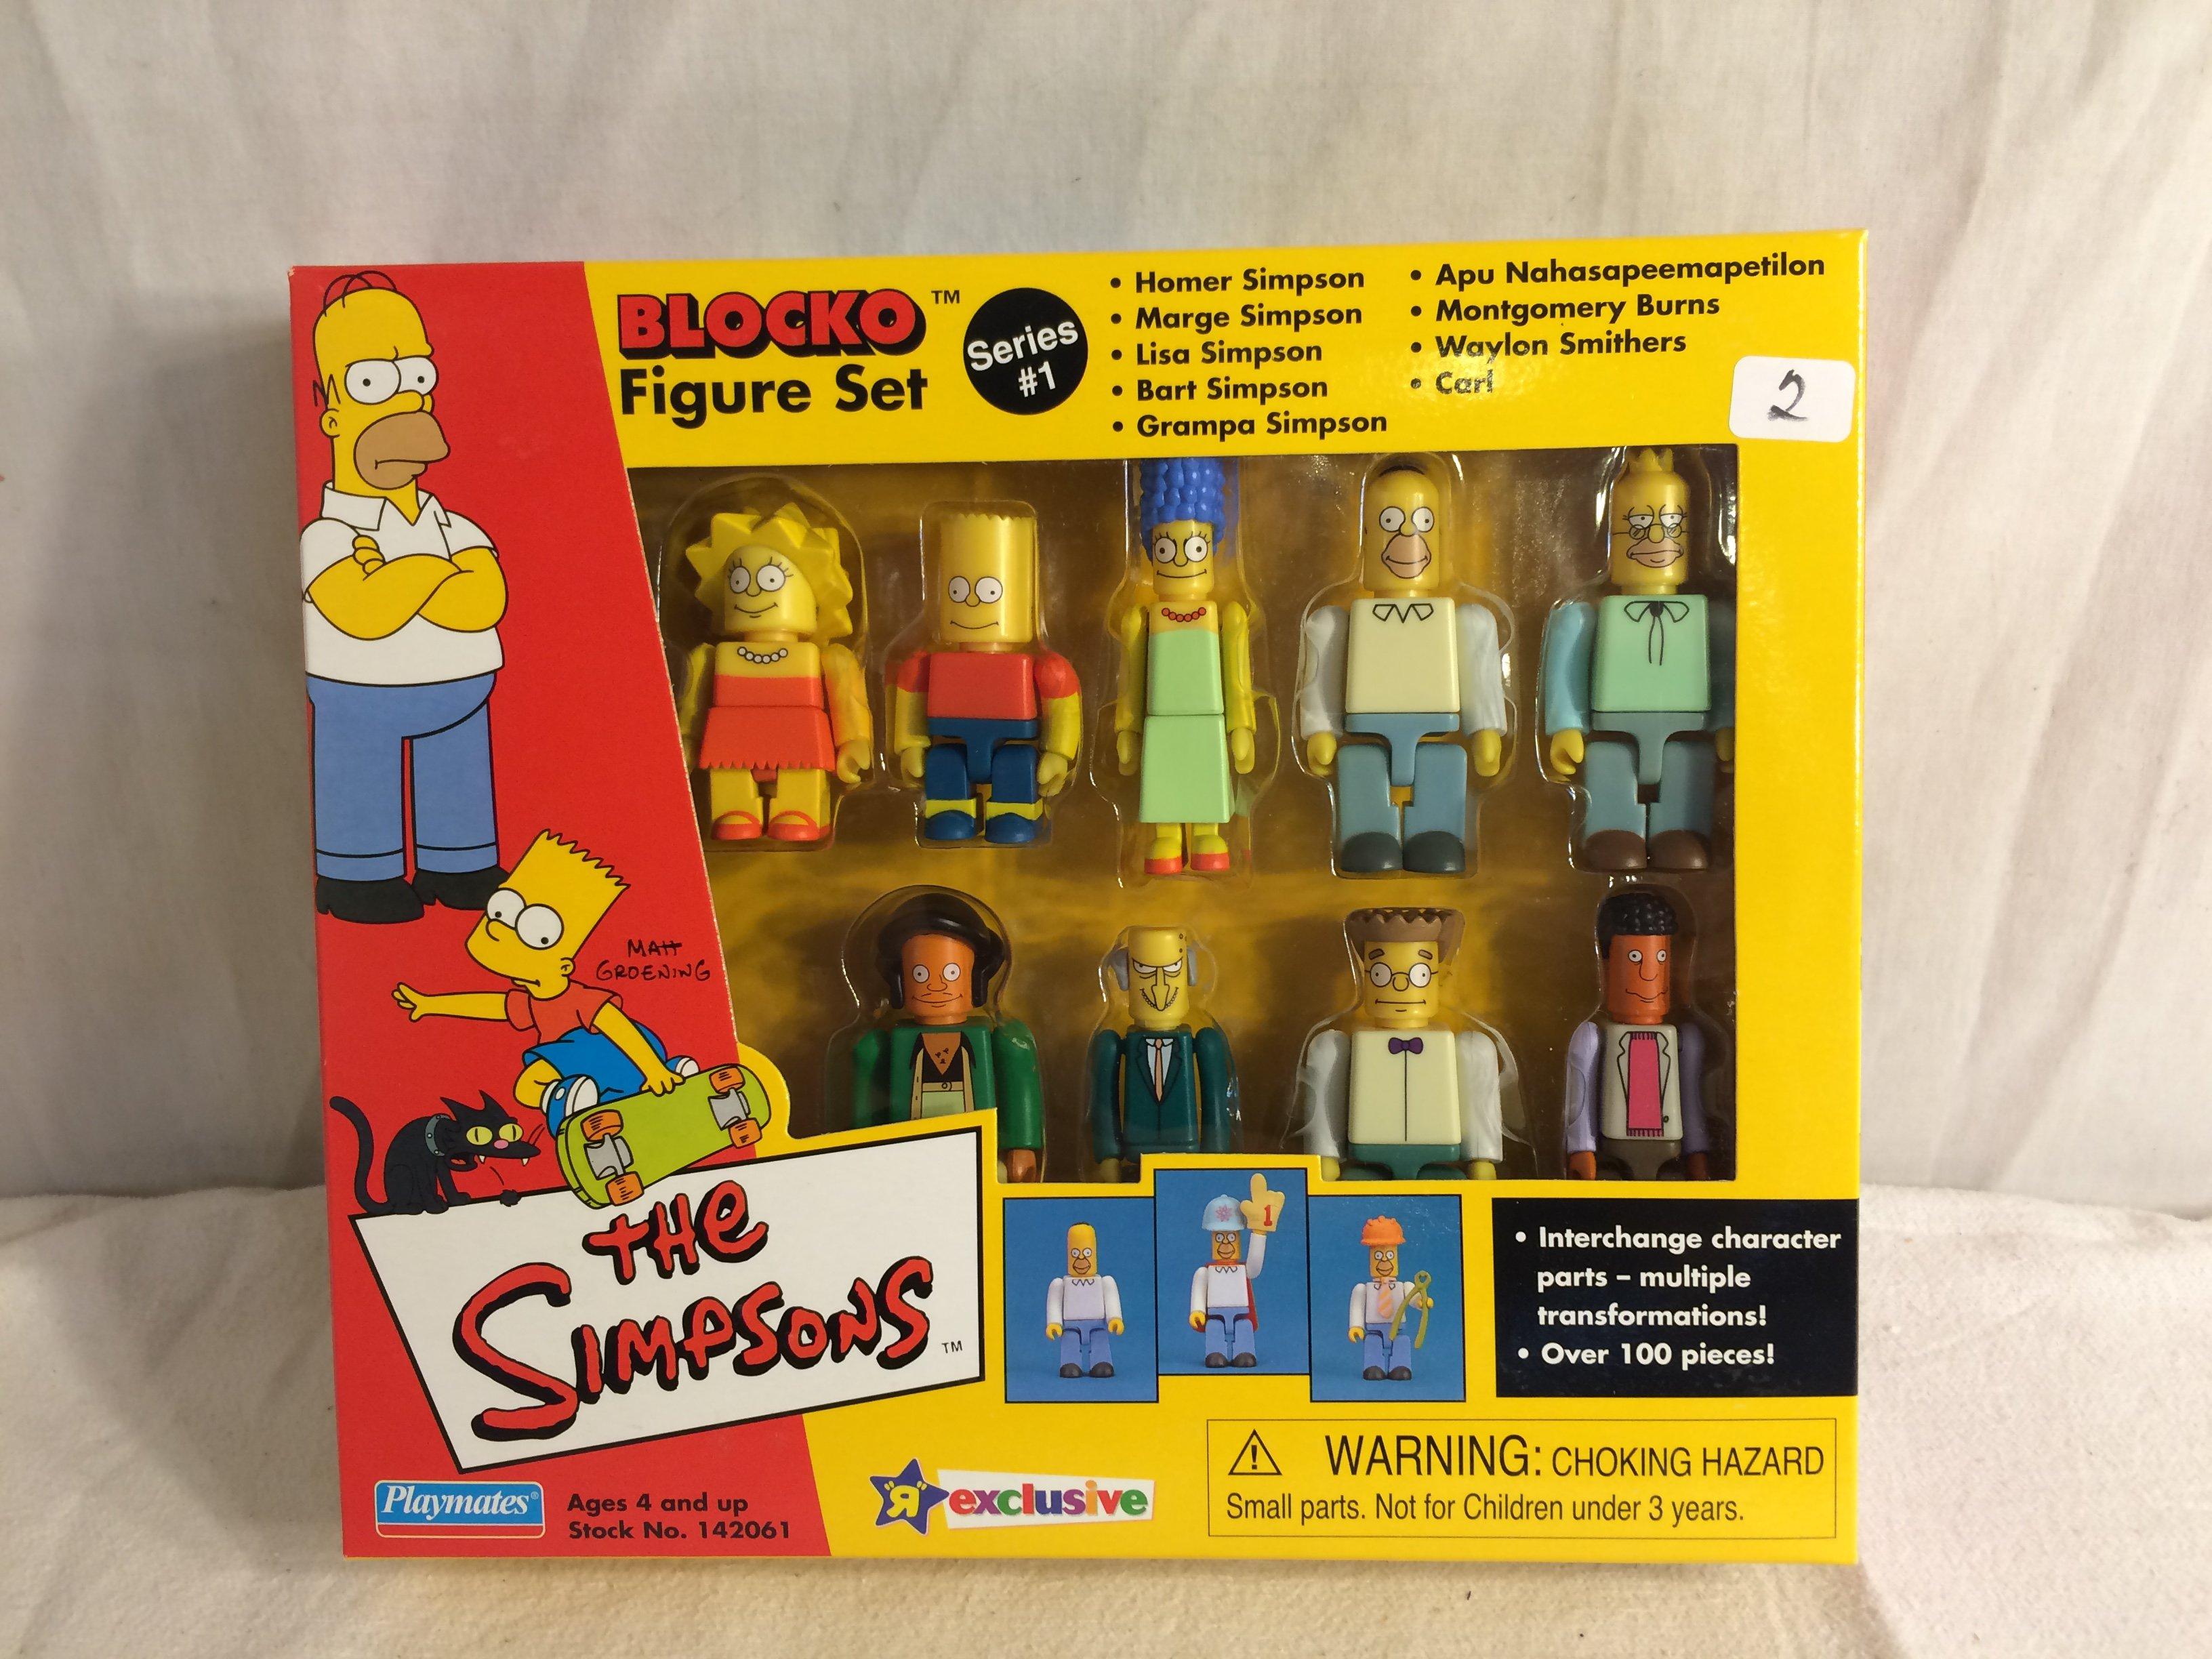 Collector The Simpsons Blocko Figure Set Series #1 Playmates Exclusive "R" 8.5"Tall by 10" Width